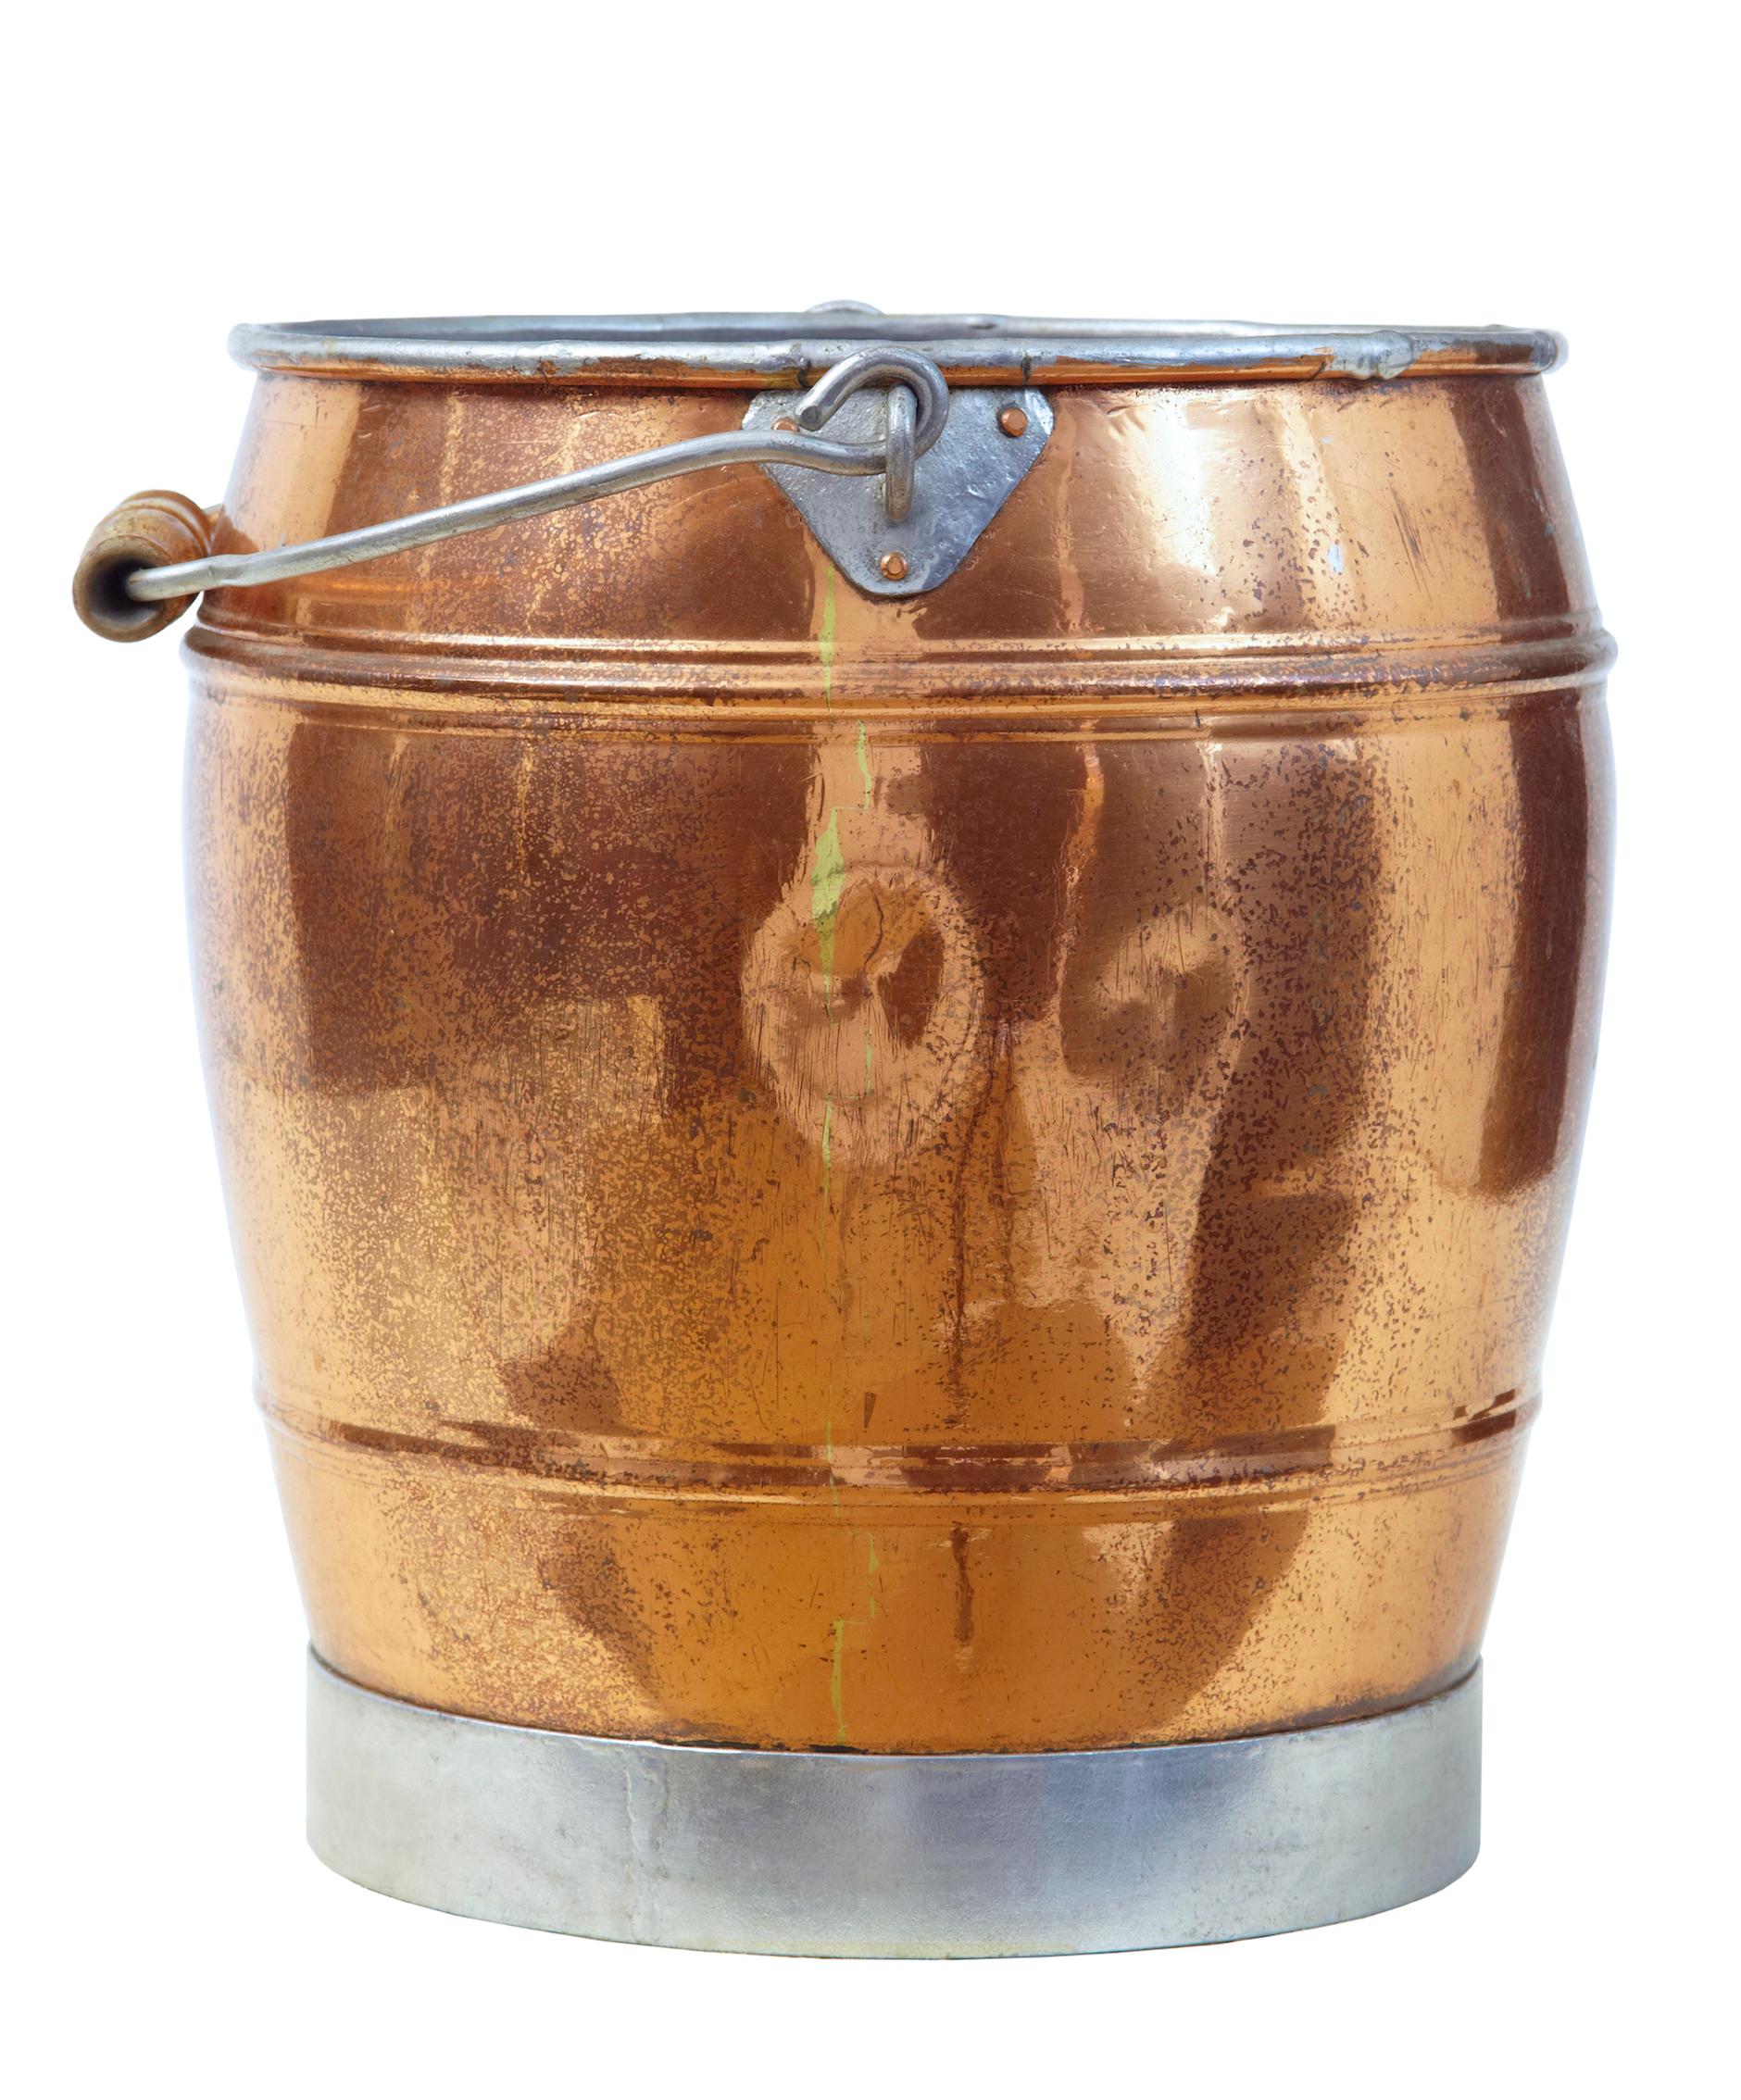 Arts and crafts Scandinavian copper bucket circa 1890.

Fine quality keg shaped copper bucket. Steel rim base and handle with turned pine handle. Ideal for use as a log bin or quirky waste paper basket.

Expected surface marks and fading.